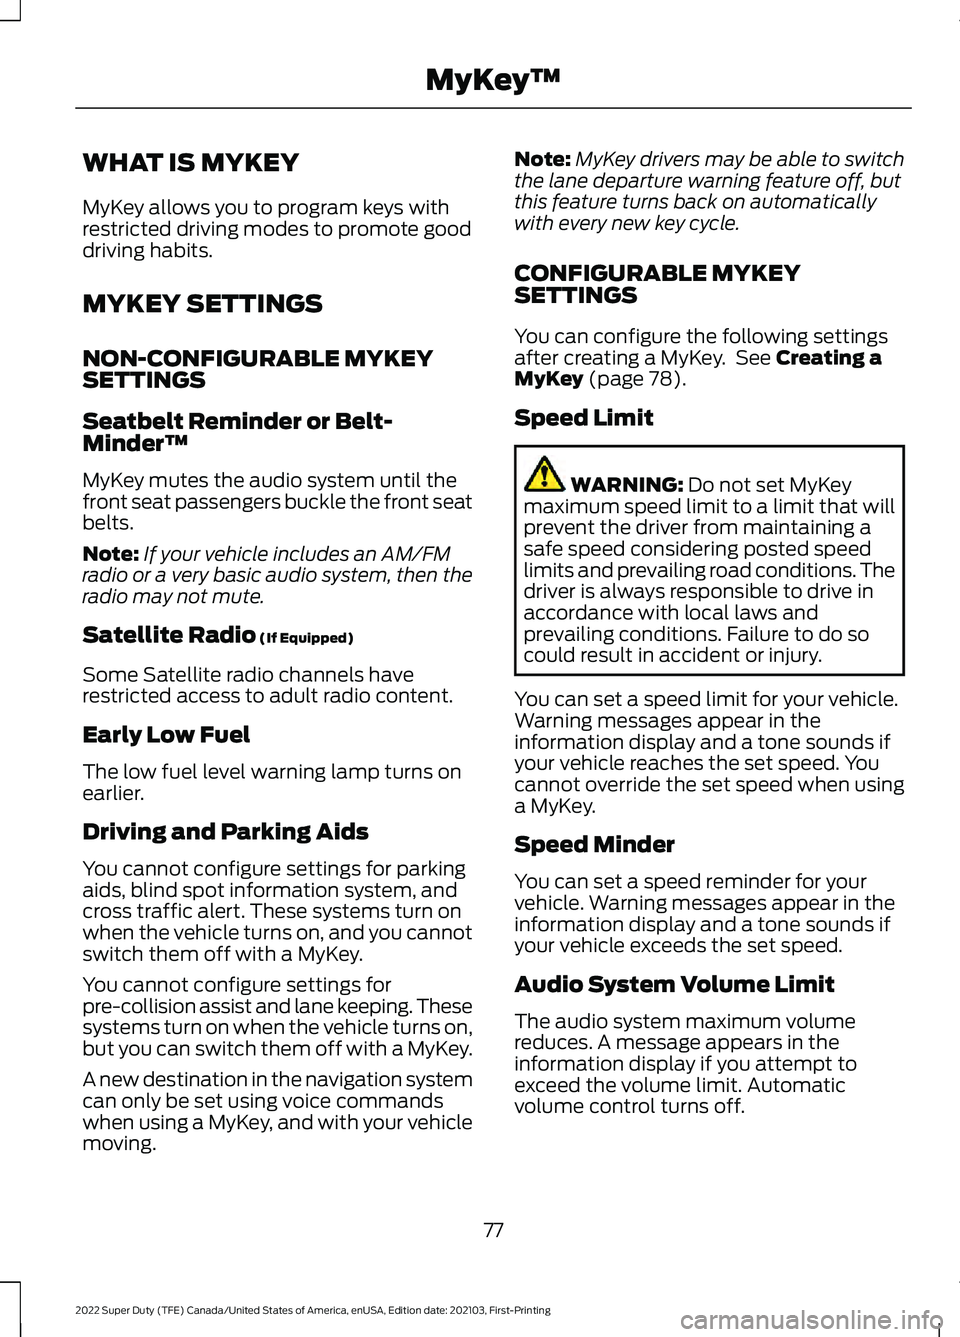 FORD F-550 2022  Owners Manual WHAT IS MYKEY
MyKey allows you to program keys with
restricted driving modes to promote good
driving habits.
MYKEY SETTINGS
NON-CONFIGURABLE MYKEY
SETTINGS
Seatbelt Reminder or Belt-
Minder™
MyKey m